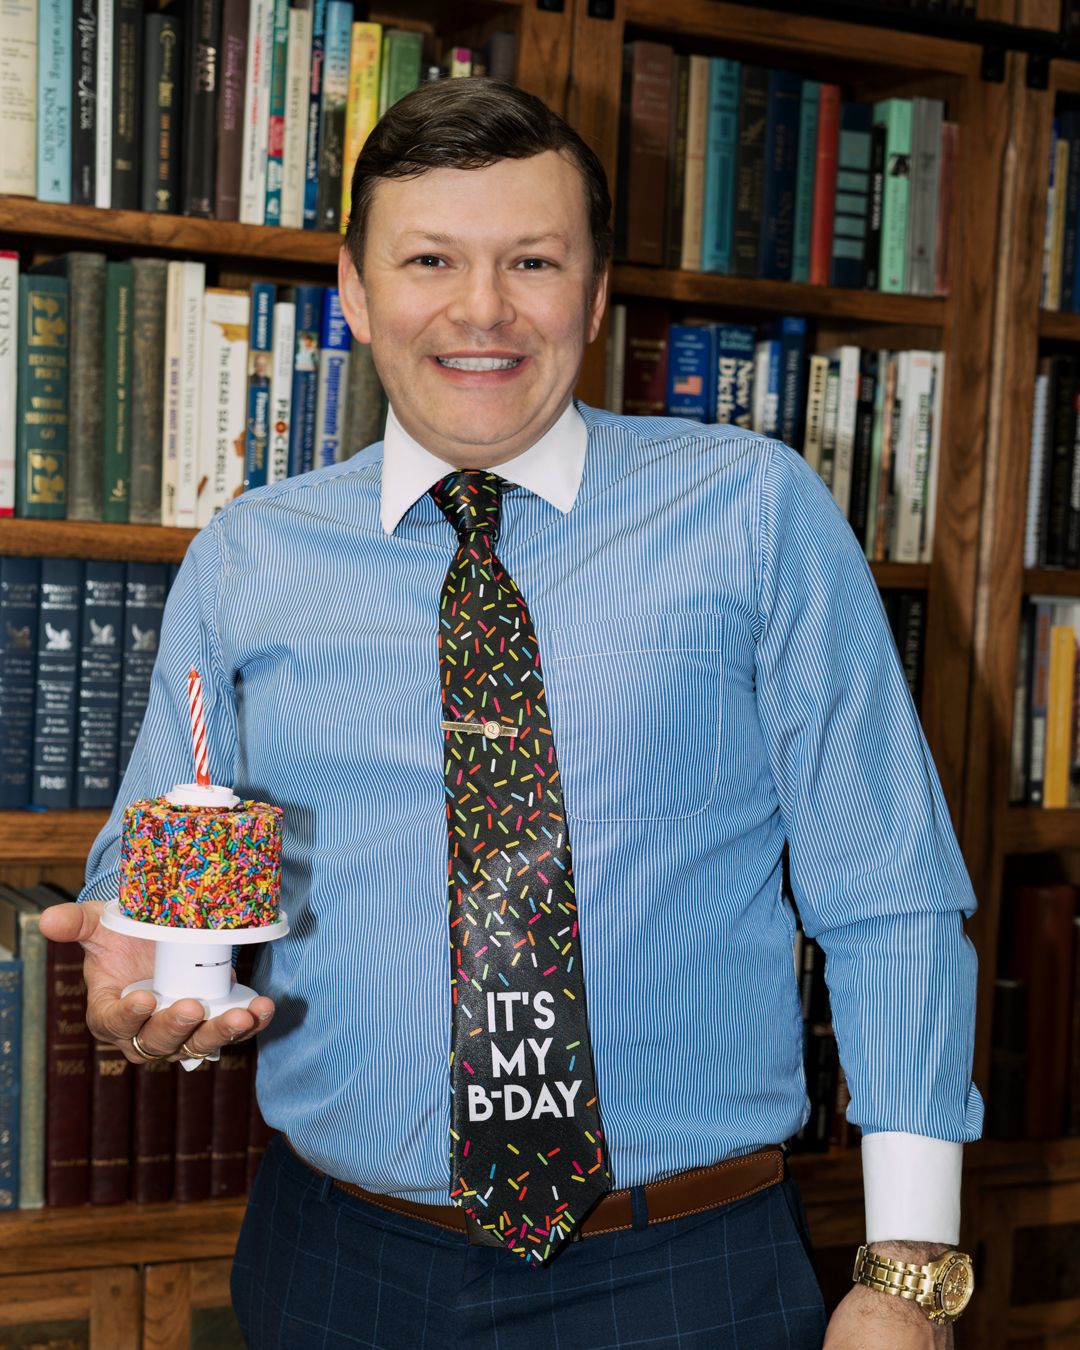 A person wearing a tie and tie holding a birthday cake Description automatically generated